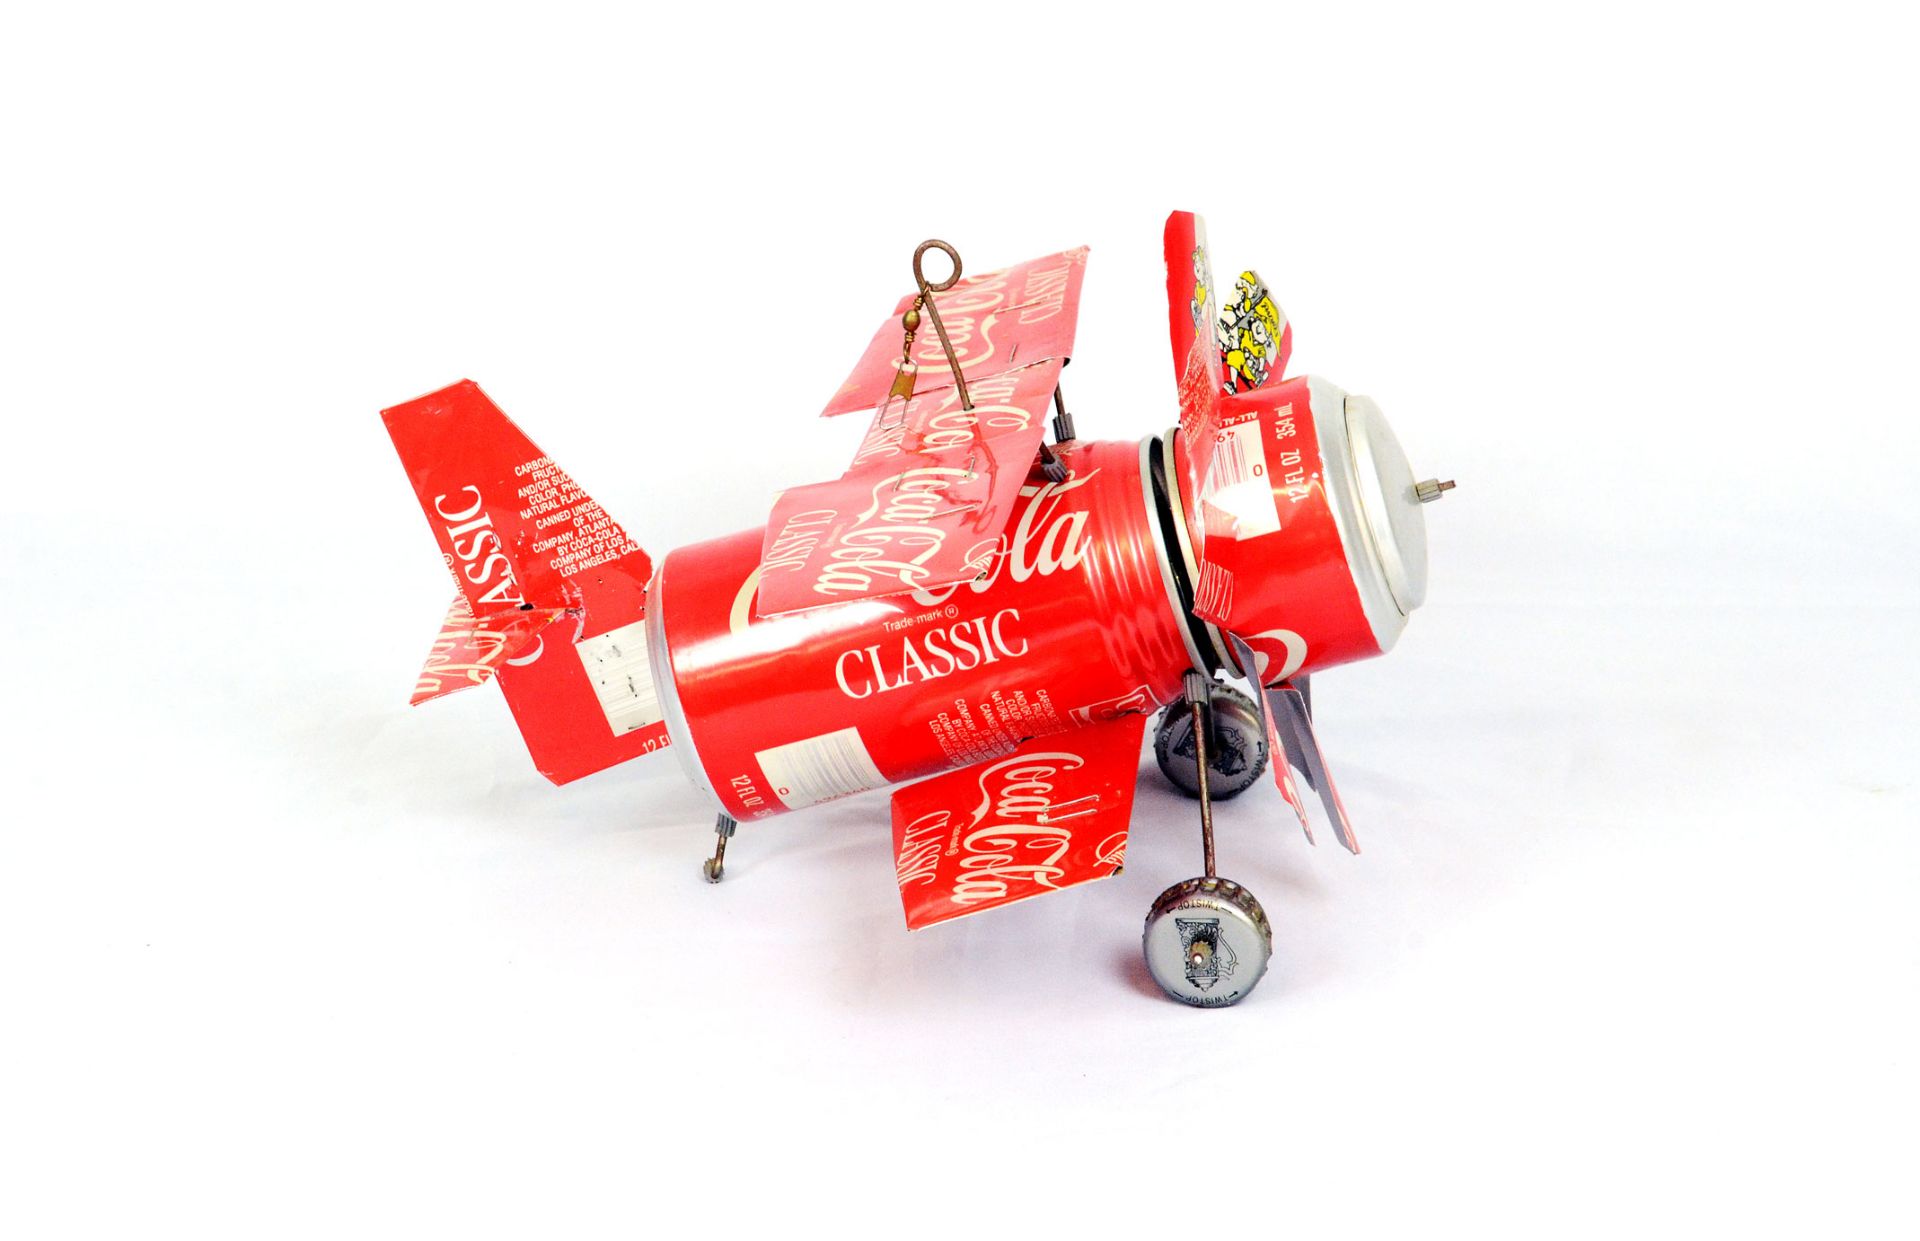 Hangable biplane toy made from Coca-Cola cans - Bild 3 aus 4